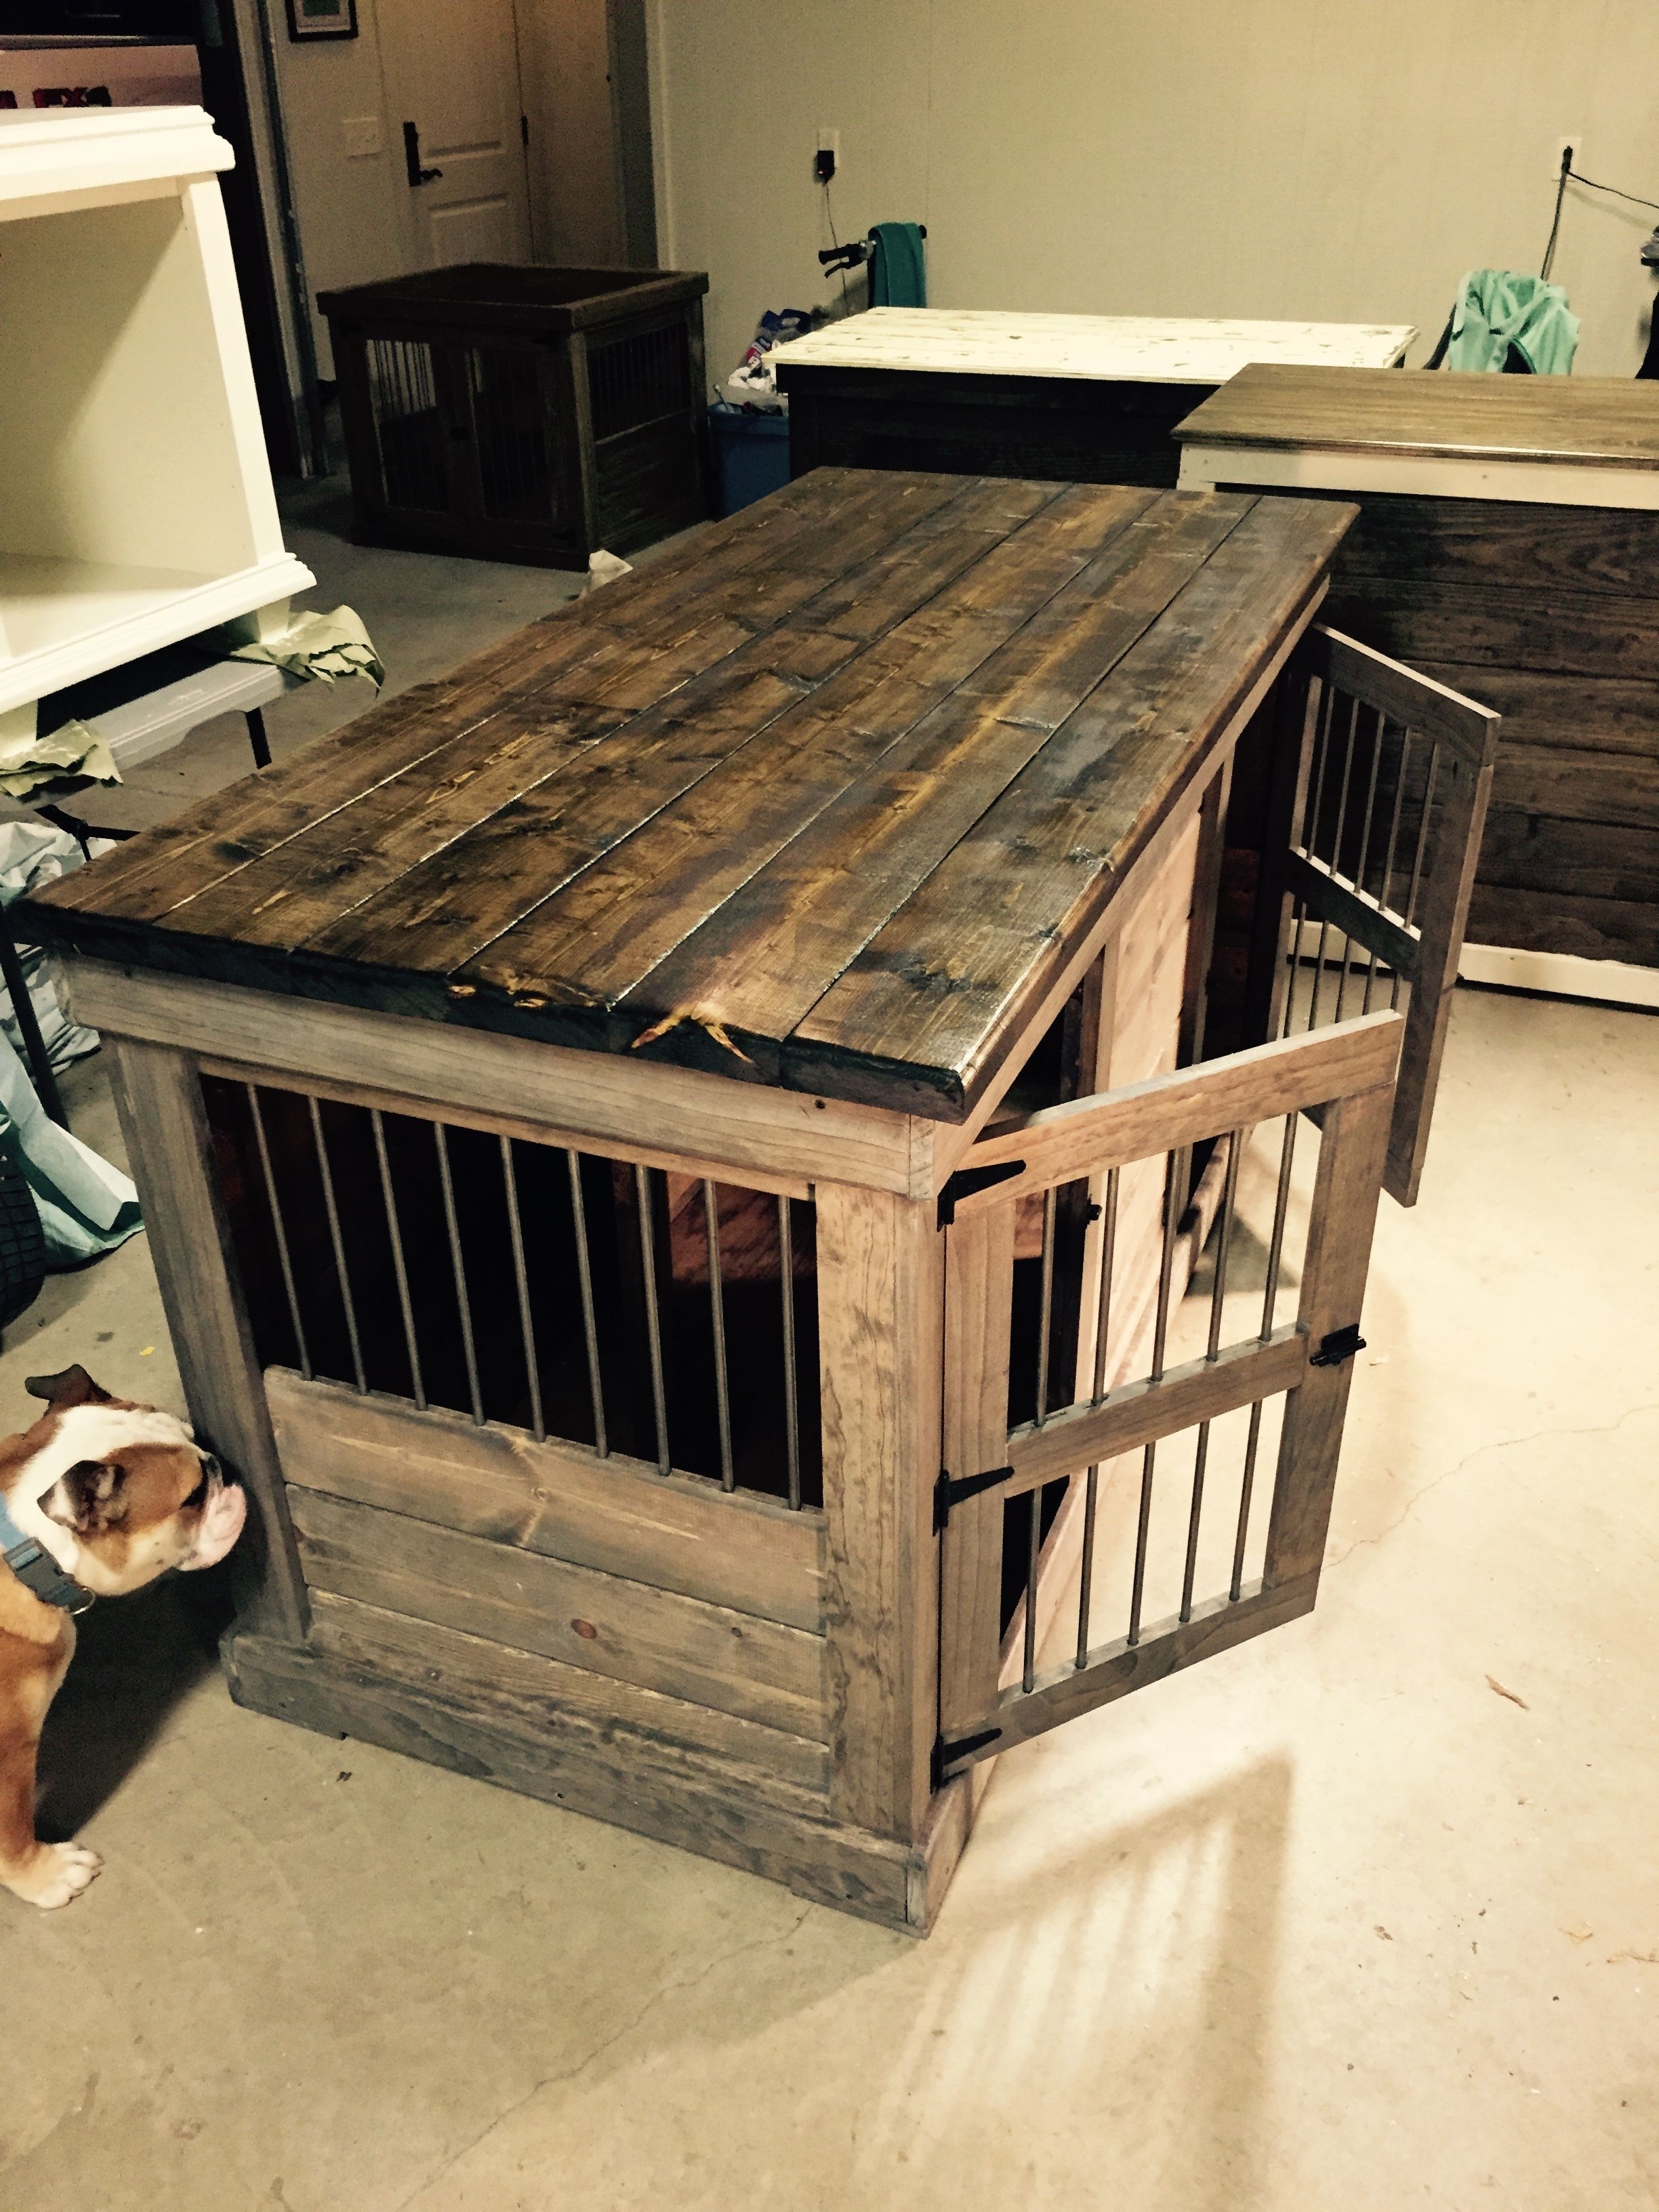 8 large dog crate coffee table ideas dog crate cover